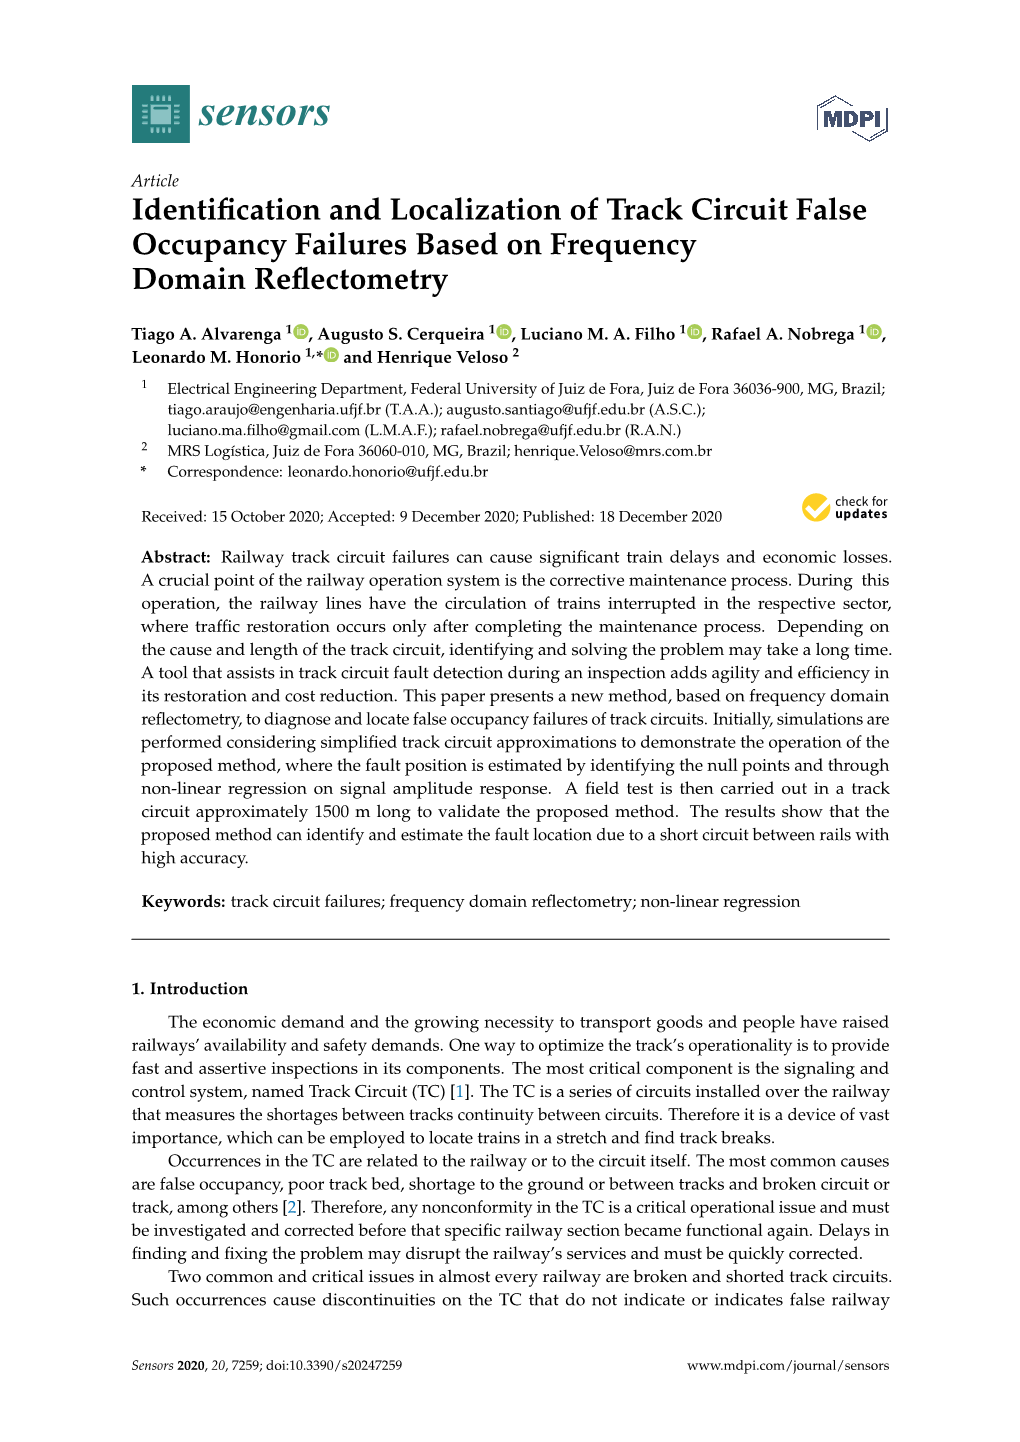 Identification and Localization of Track Circuit False Occupancy Failures Based on Frequency Domain Reflectometry